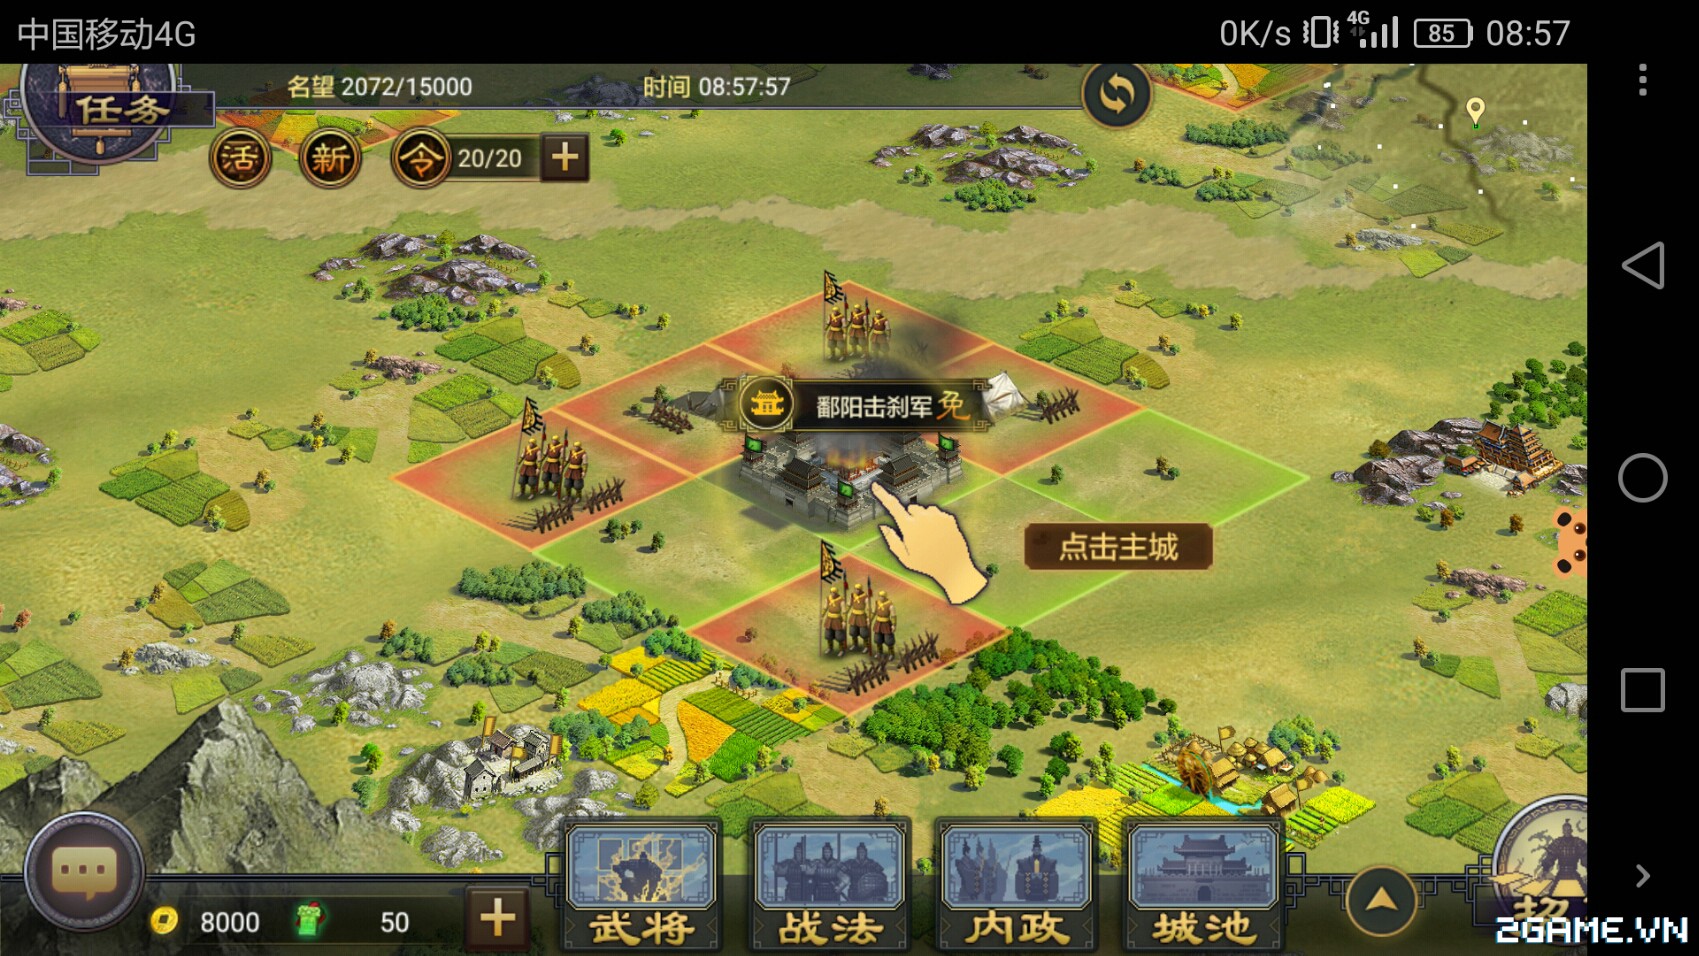 2game_anh_Reign_of_Warlords_mobile_vng_23.jpg (1699×956)